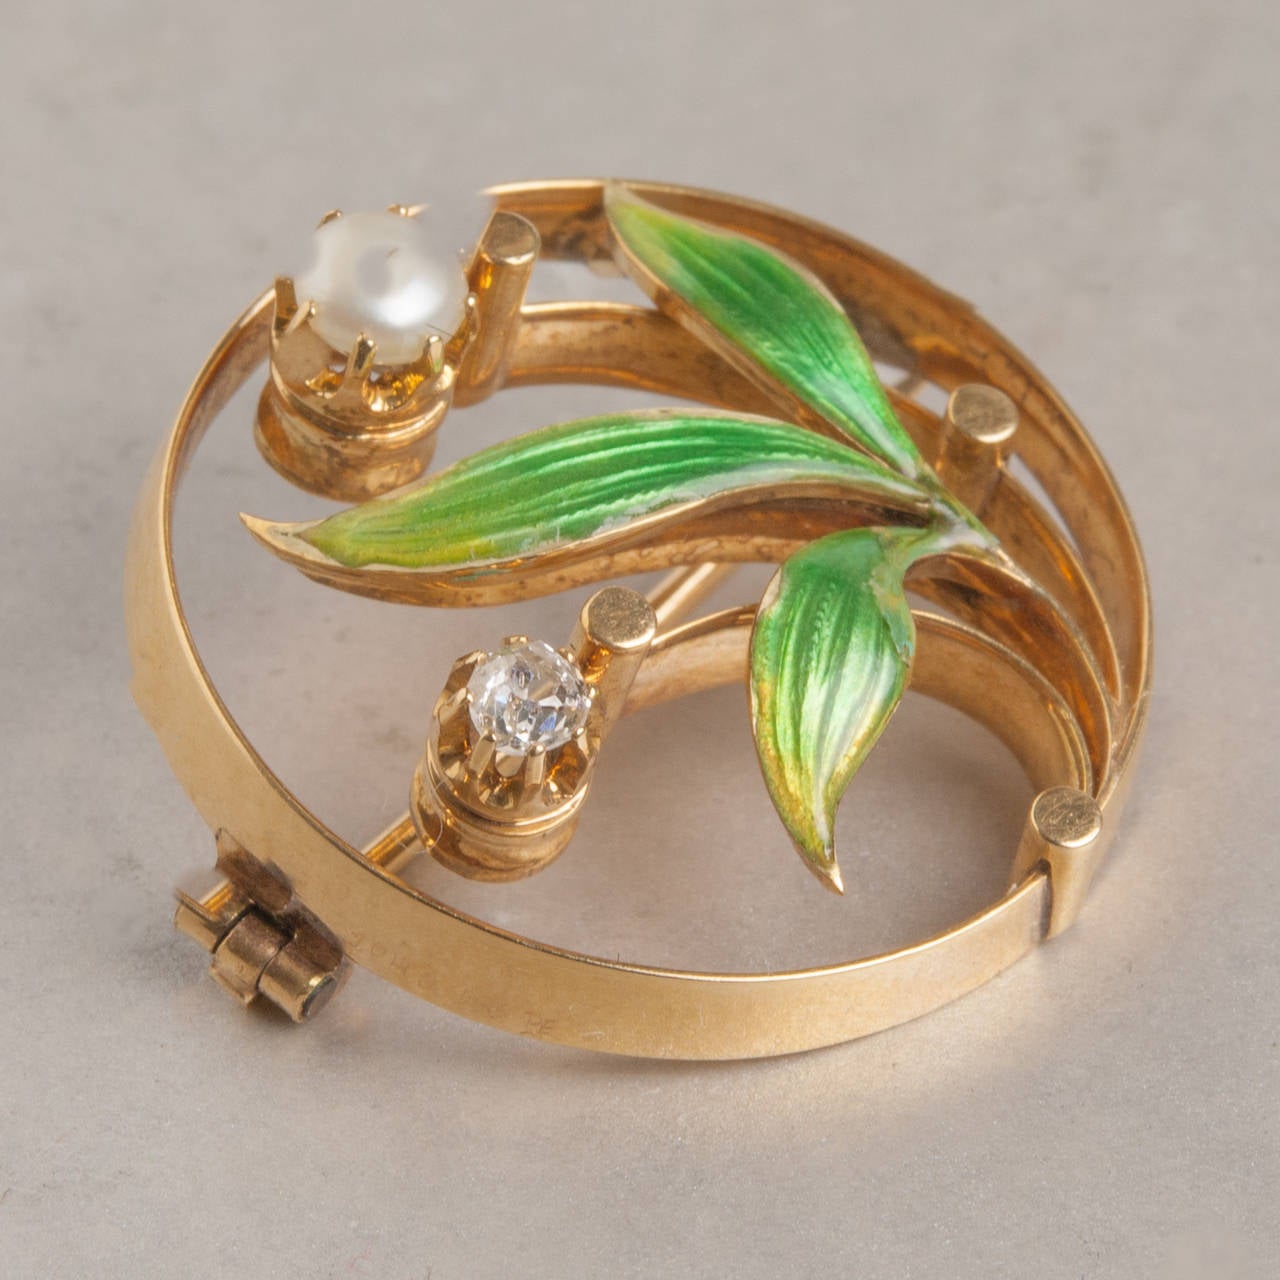 This lovely Art Nouveau pin features beautiful enamel work as well as diamond and pearl accents. The elegant floral design and exquisite enamel detailing exemplify the craftsmanship of the Art Nouveau design era. This piece is handcrafted in 14k